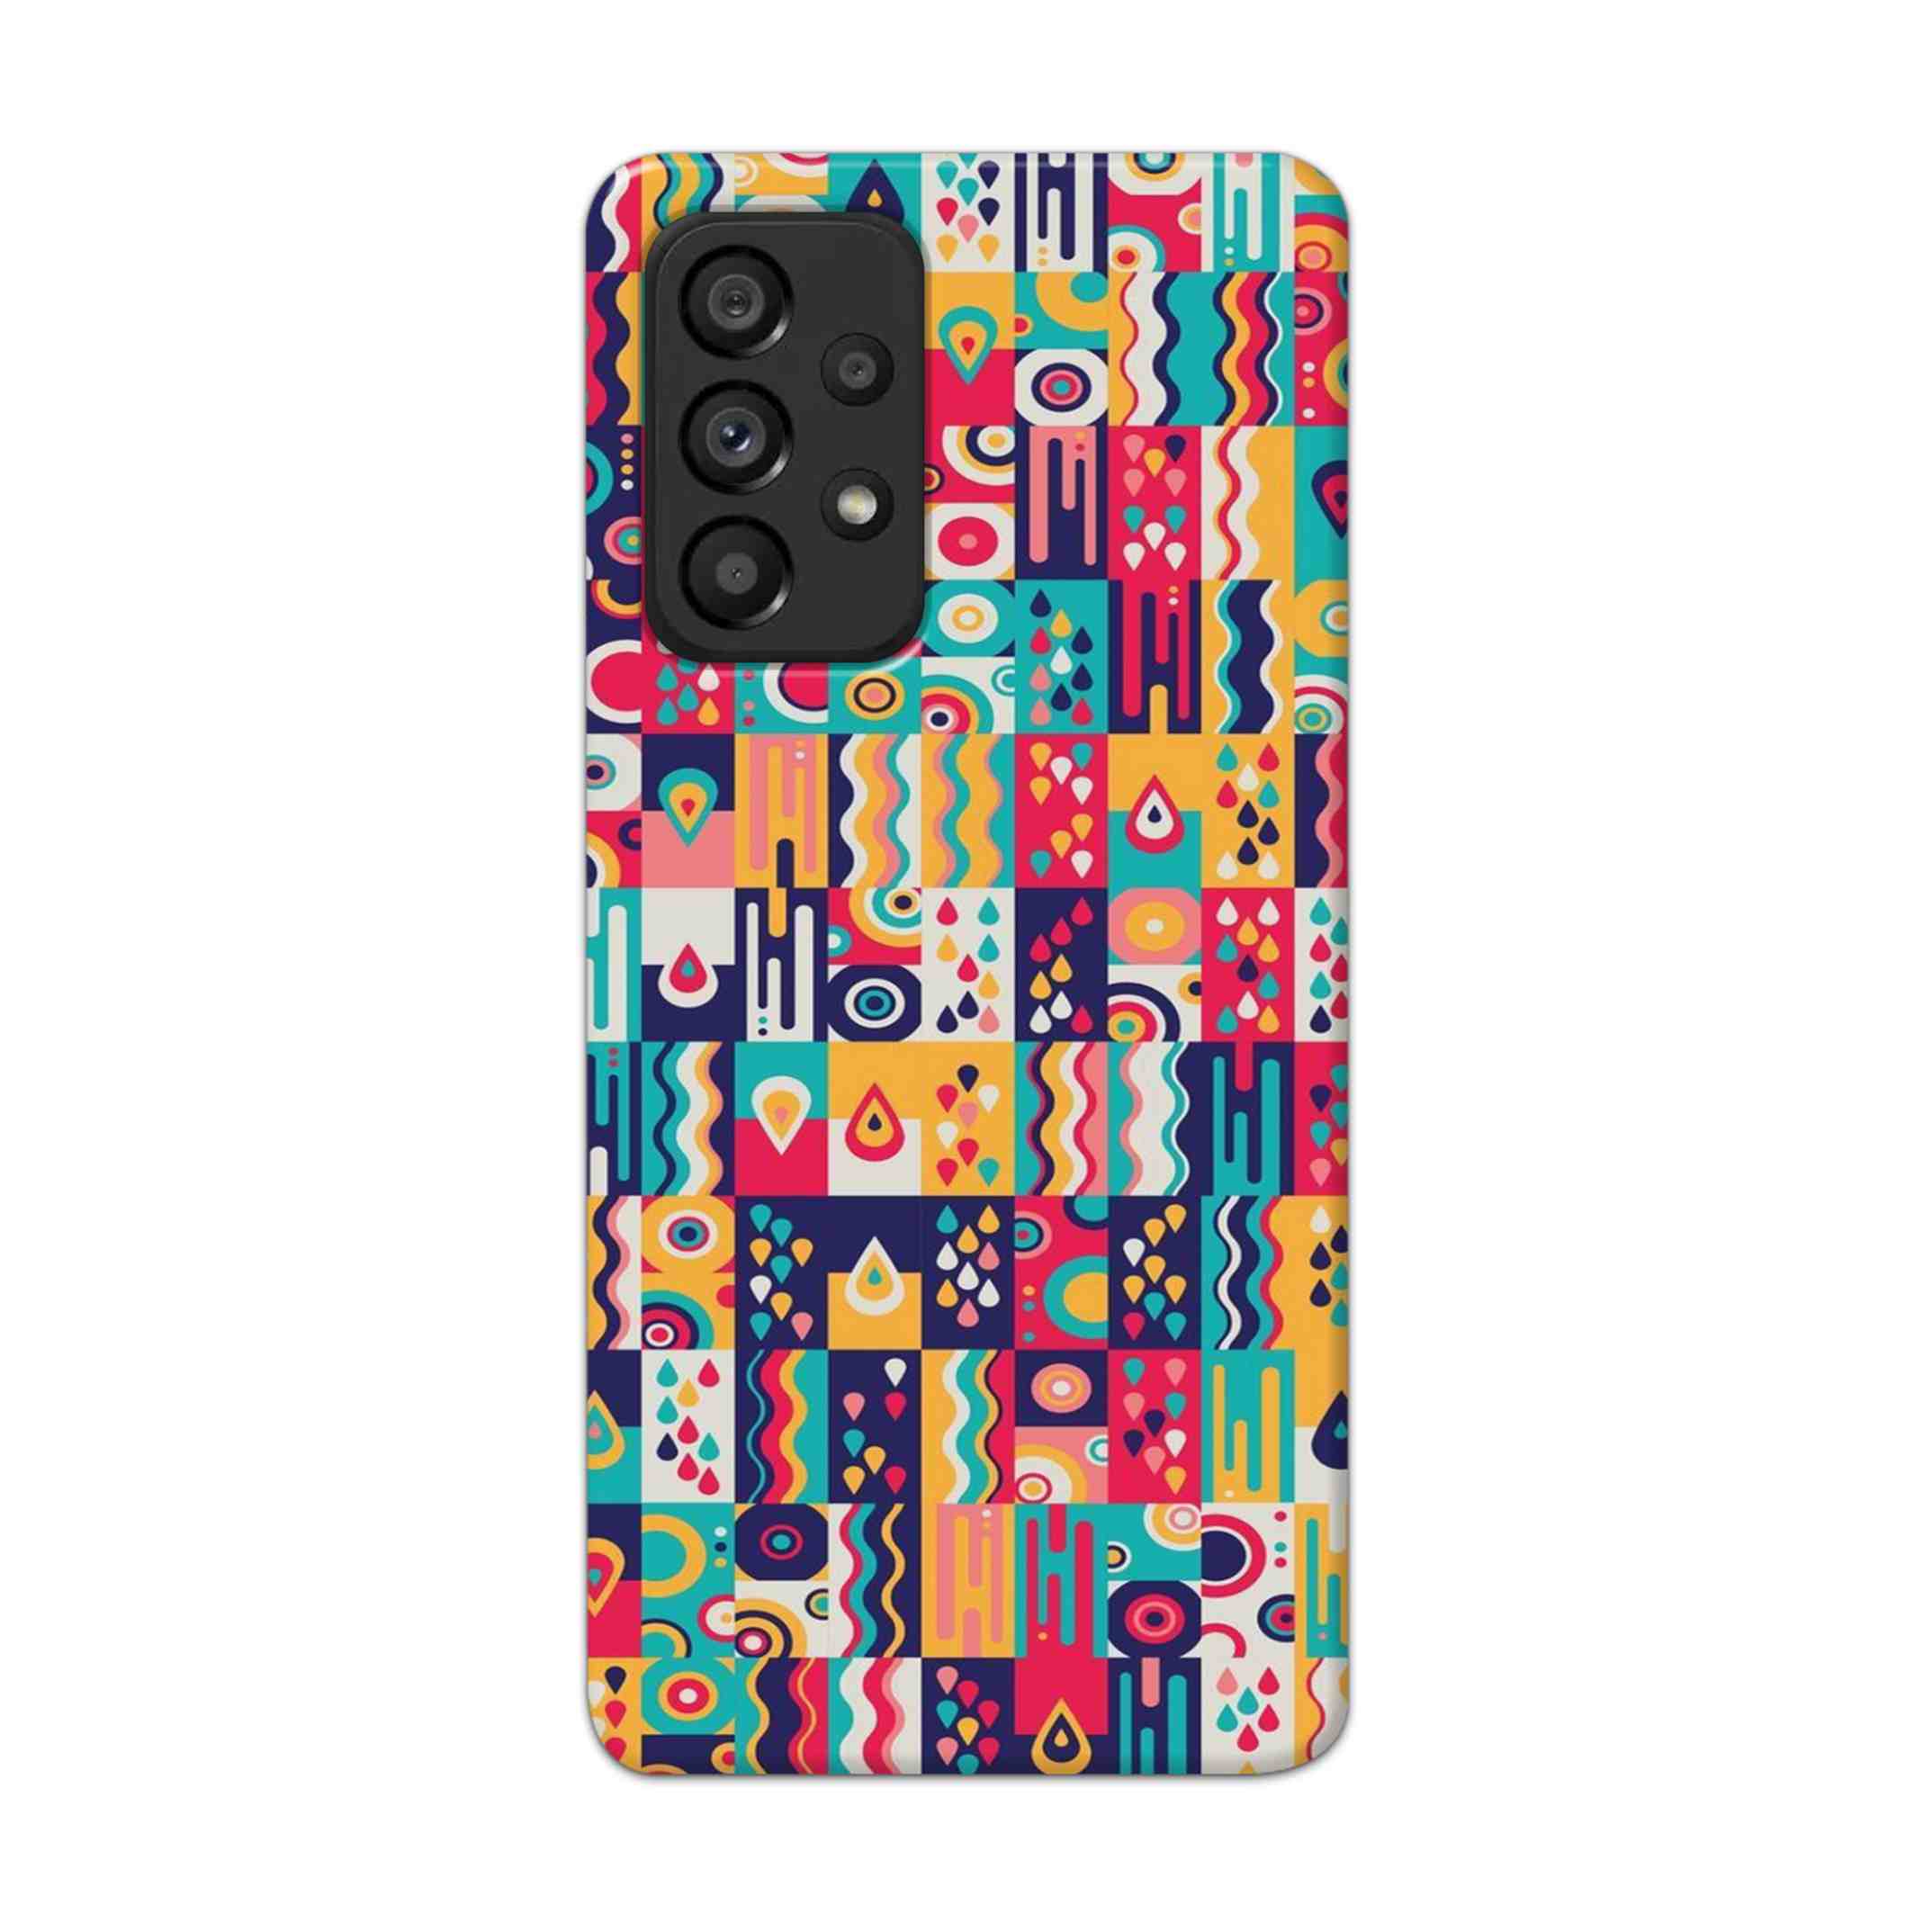 Buy Art Hard Back Mobile Phone Case Cover For Samsung Galaxy A53 5G Online